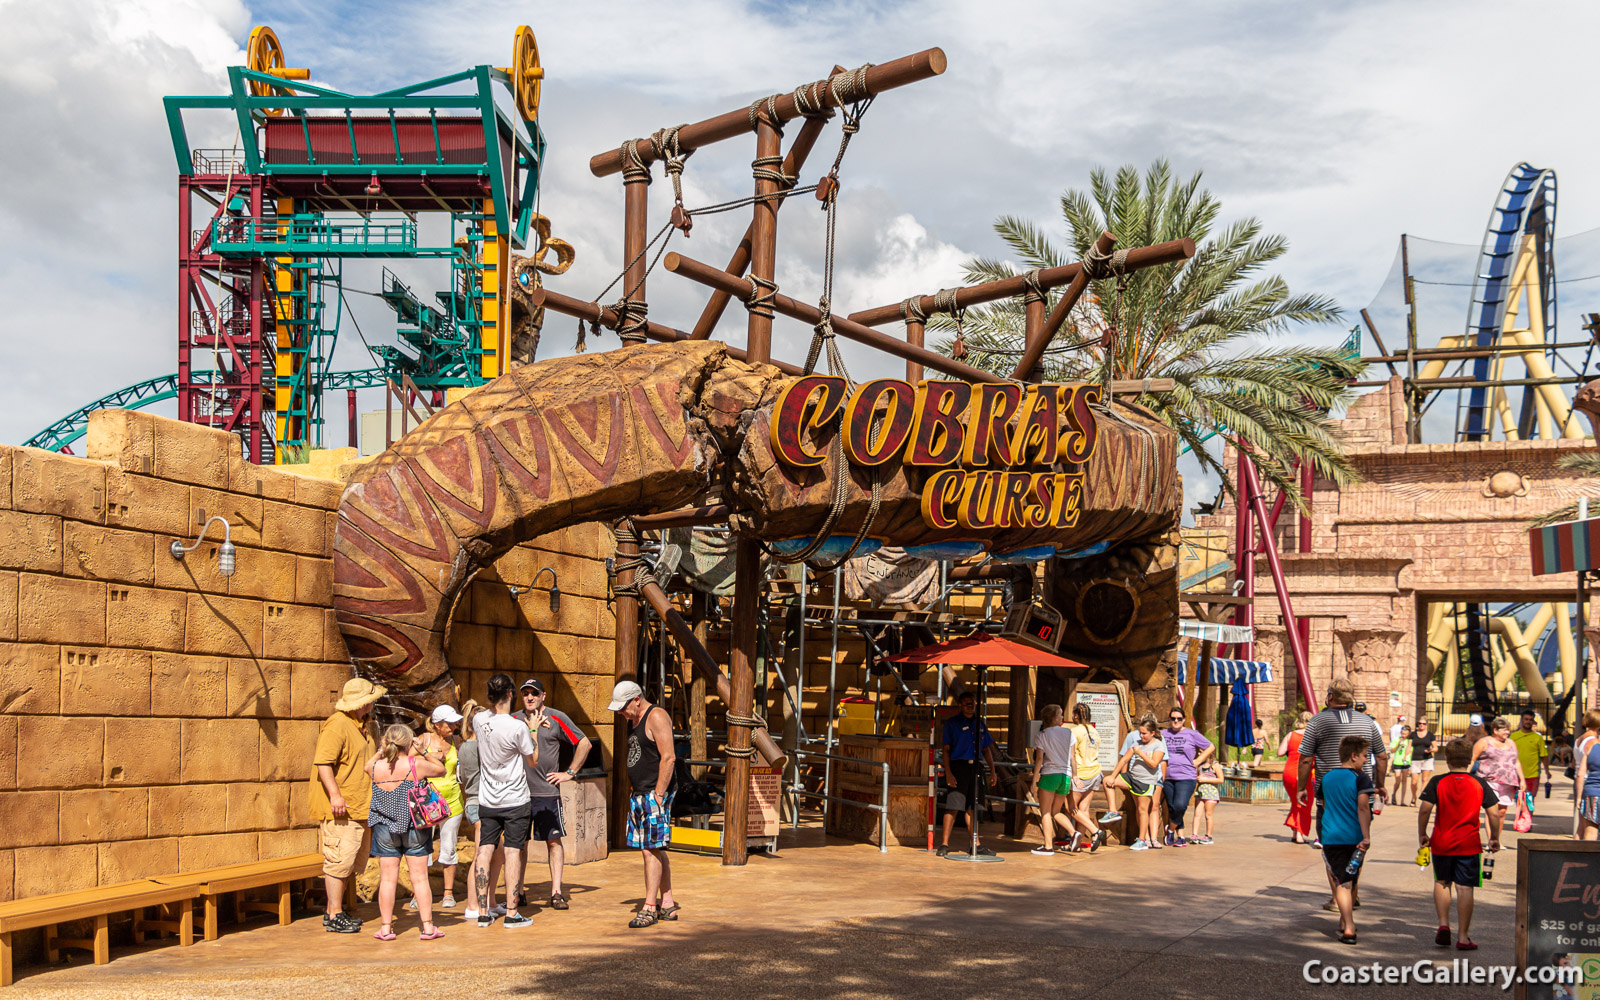 Pictures of the Cobra's Curse roller coaster at Busch Gardens Tampa in Tampa Bay, Florida